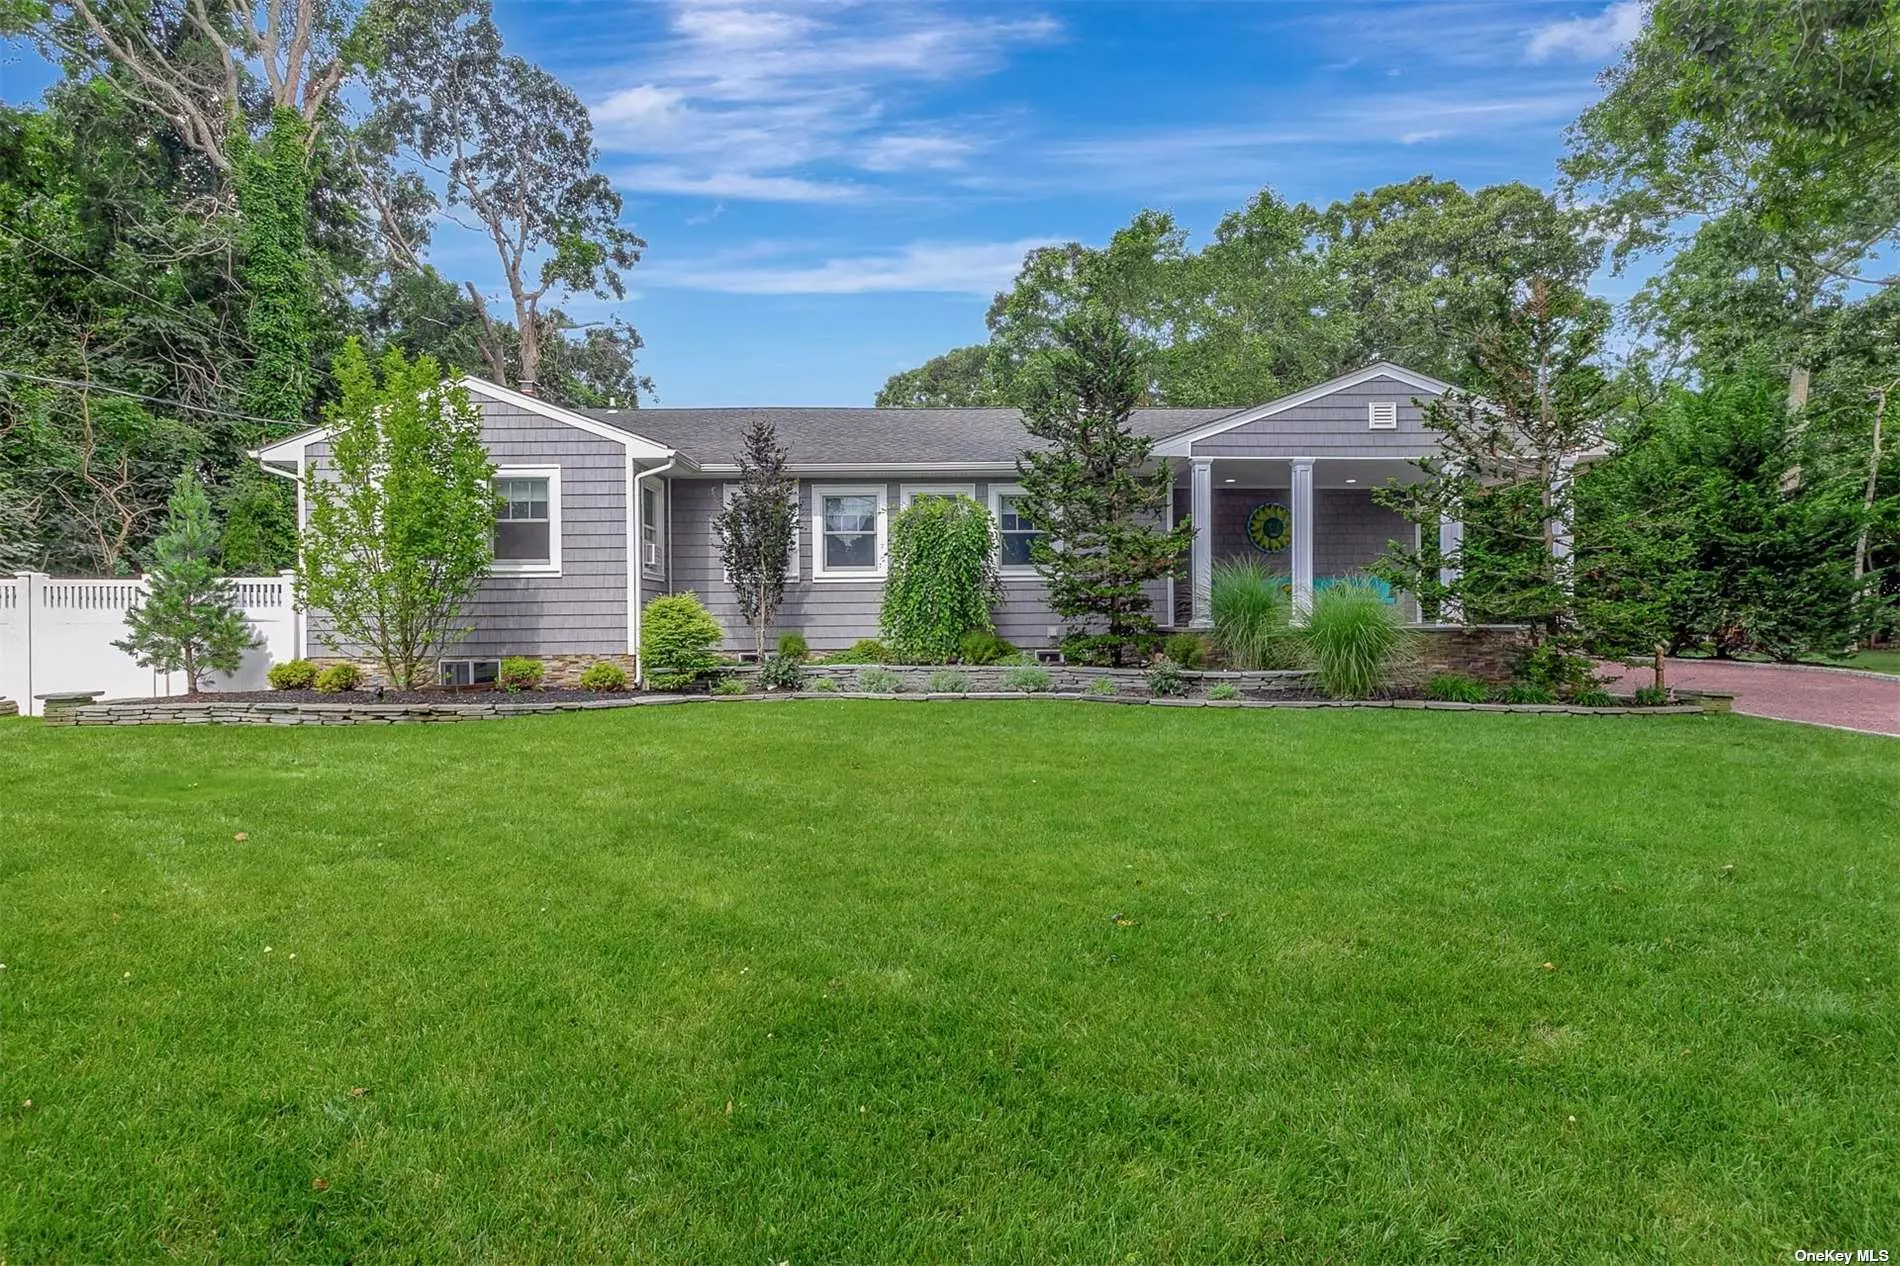 This Beautifully Renovated Farm Ranch is Waiting for you! In the Heart of Center Moriches, South of Main Street with short distance to the Water! 3 Beds, 3 Baths, Stunning Kitchen, Living Room and Family Room with extra space for all! Has an extra-large lot complete with an in-ground pool surrounded by pavers, large deck for outdoor living and gorgeous landscaping. Come See what this magnificent property has to offer for you!